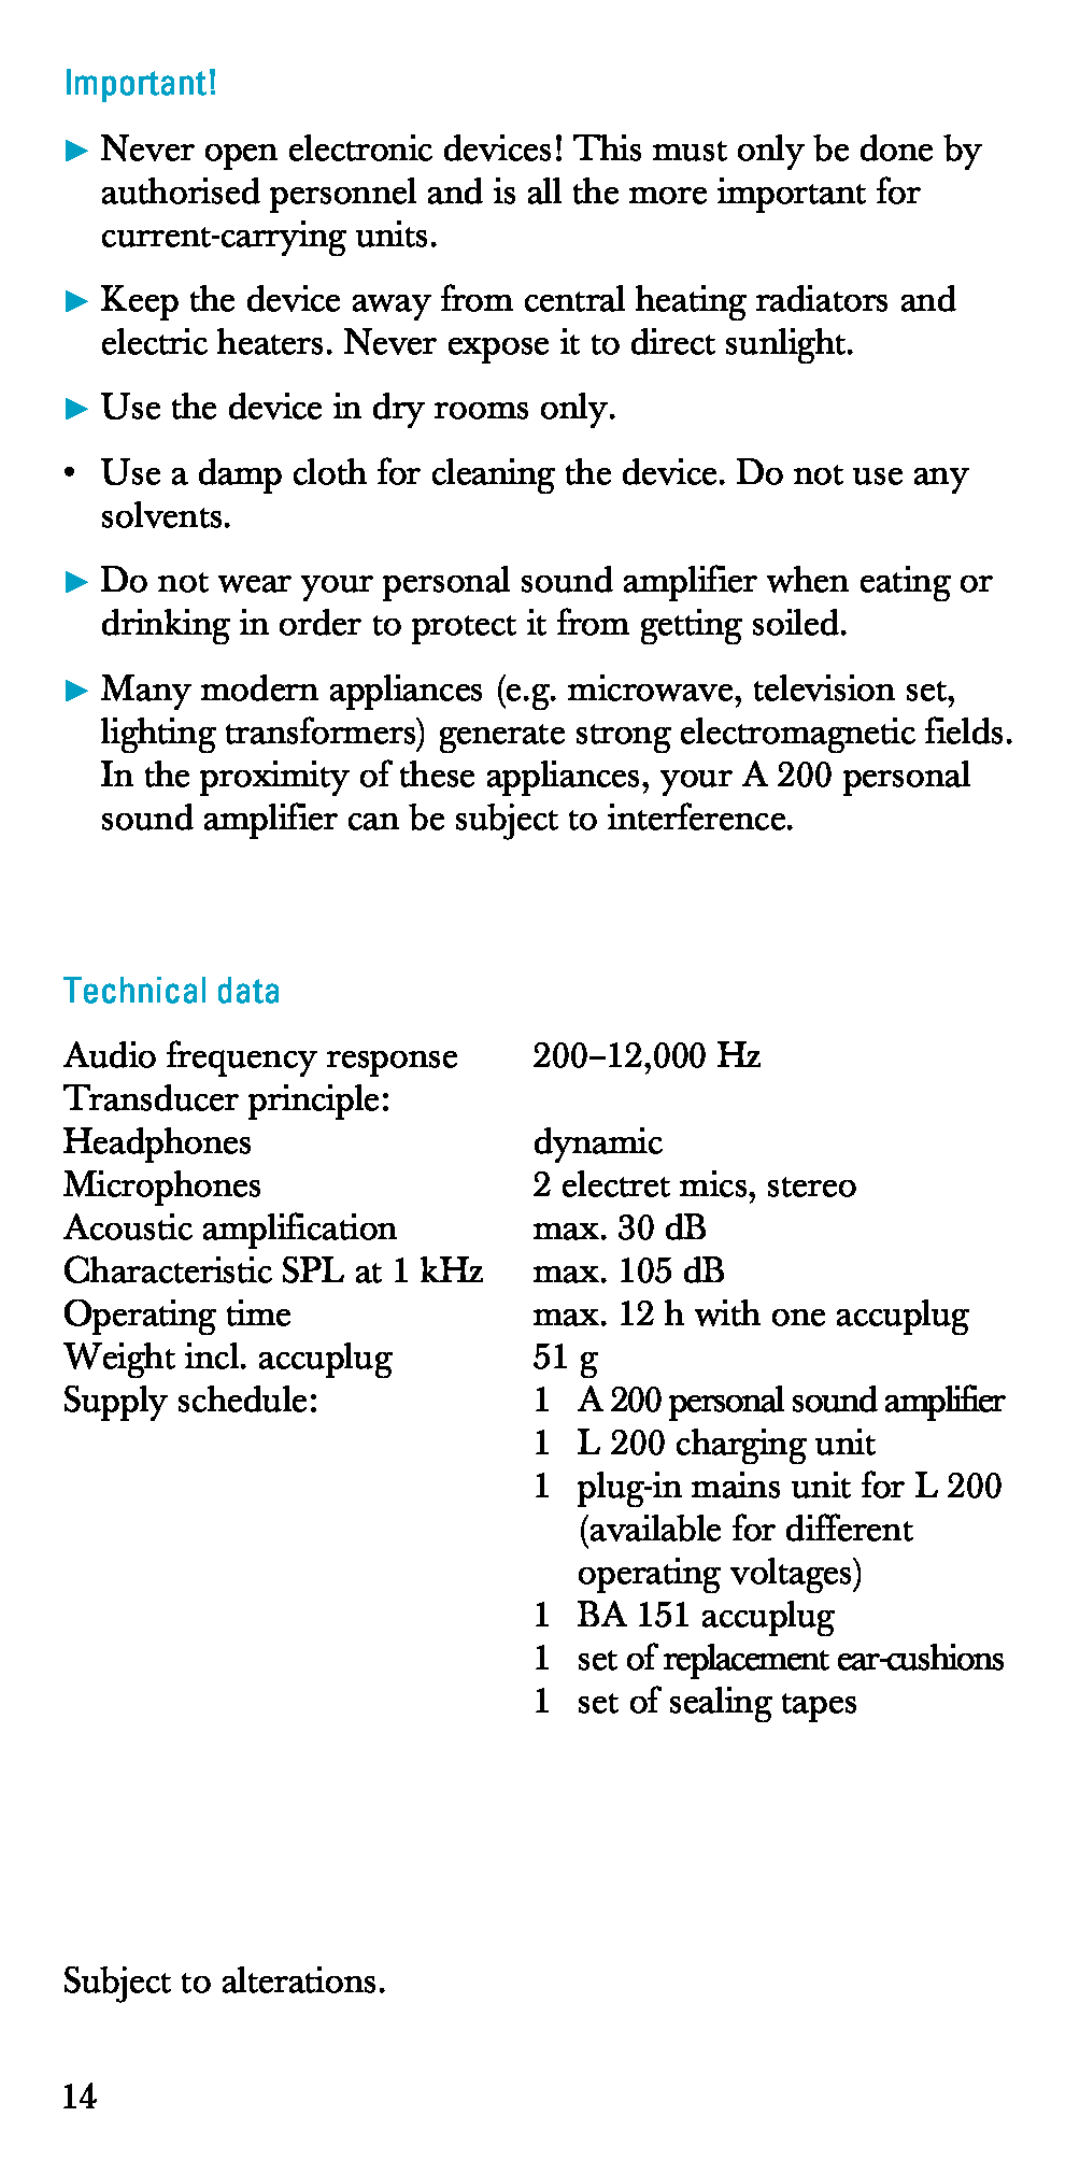 Sennheiser A200 manual Technical data, Use the device in dry rooms only 